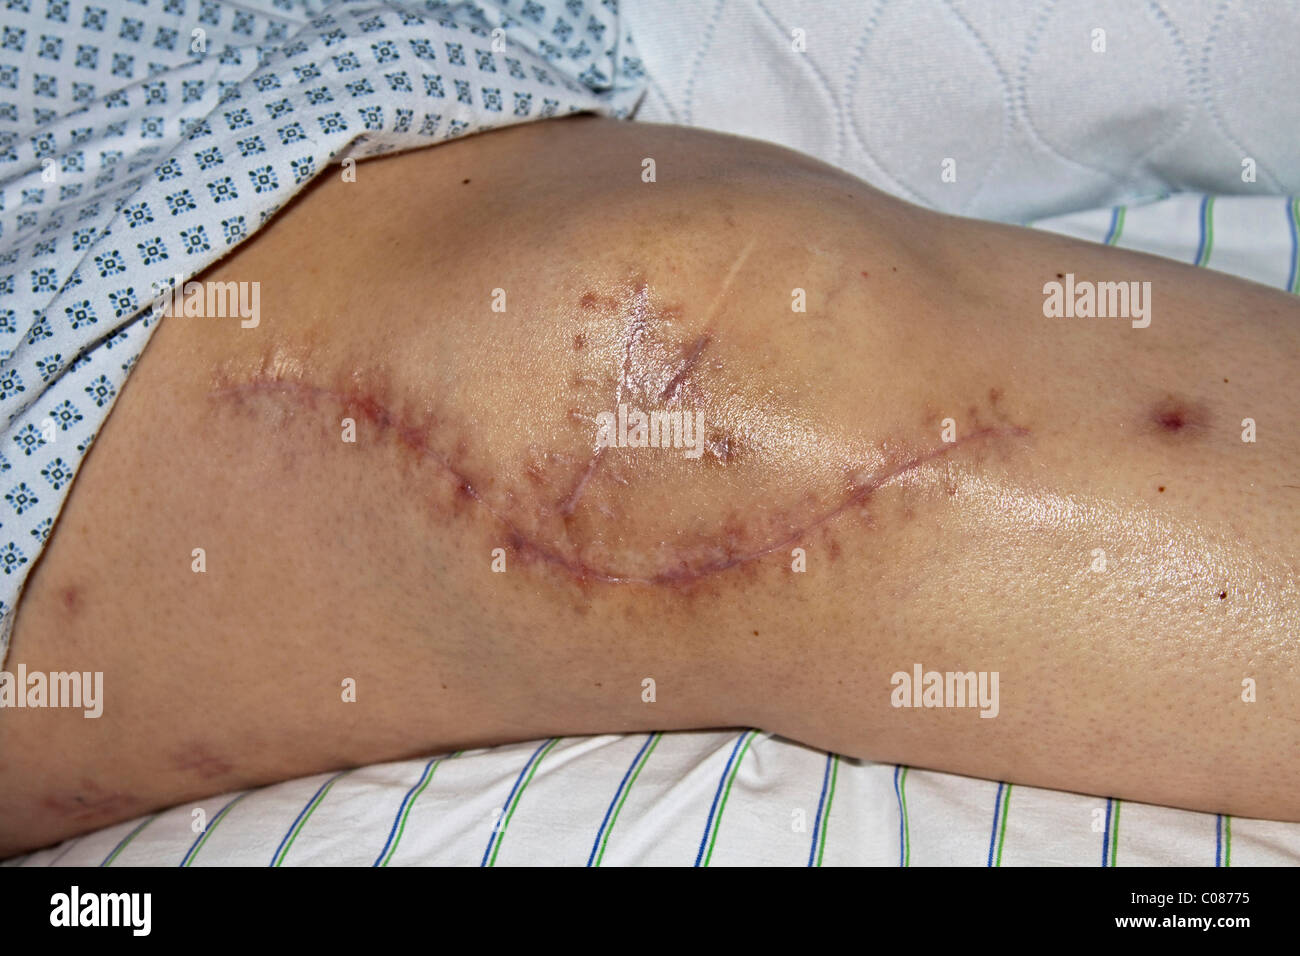 Fresh scar on an operated knee after insertion of implants after a serious traffic accident Stock Photo